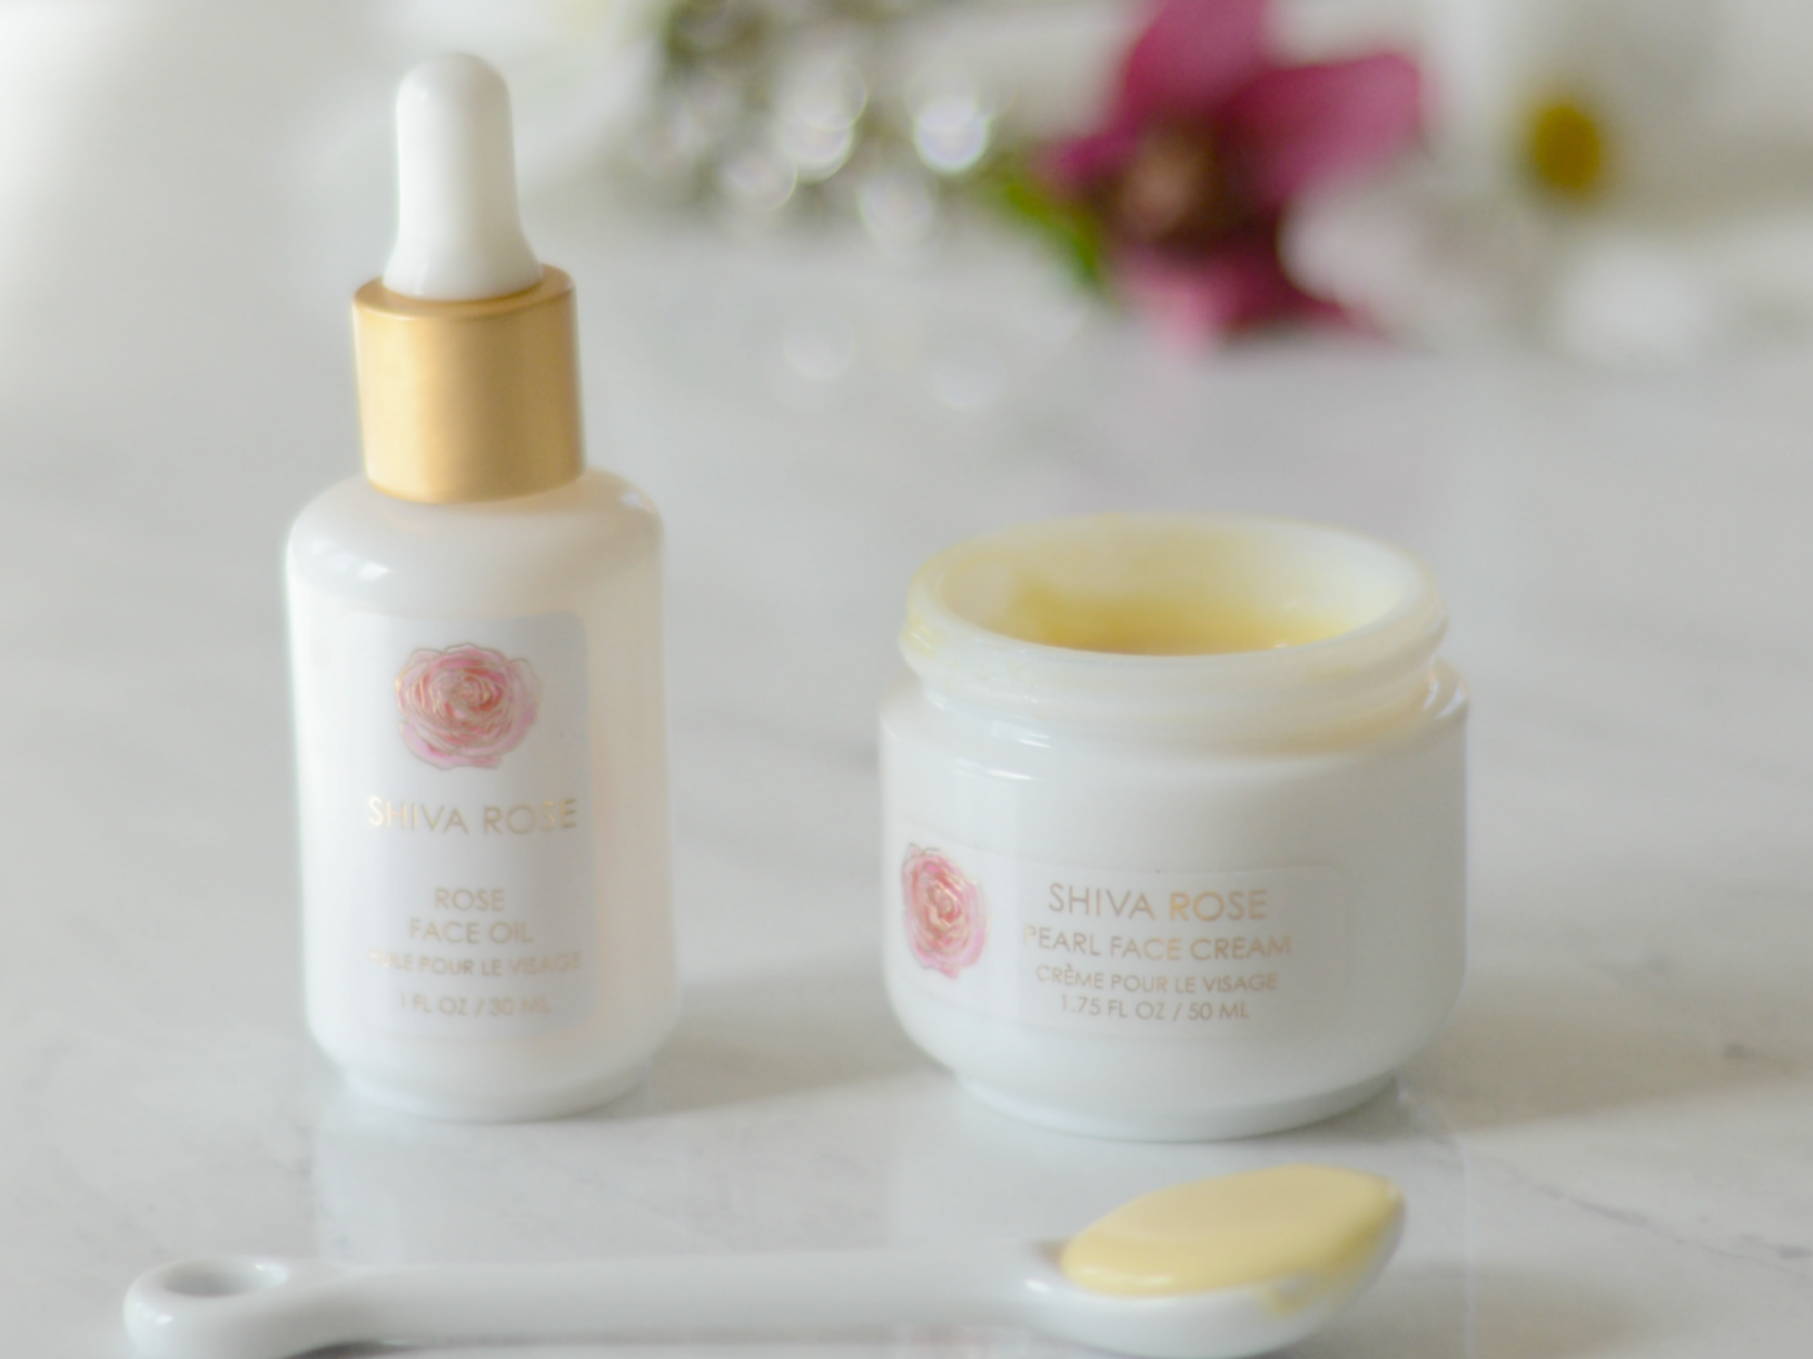 Shiva Rose Face Oil and Pearl Rose Face Cream at Art of Pure